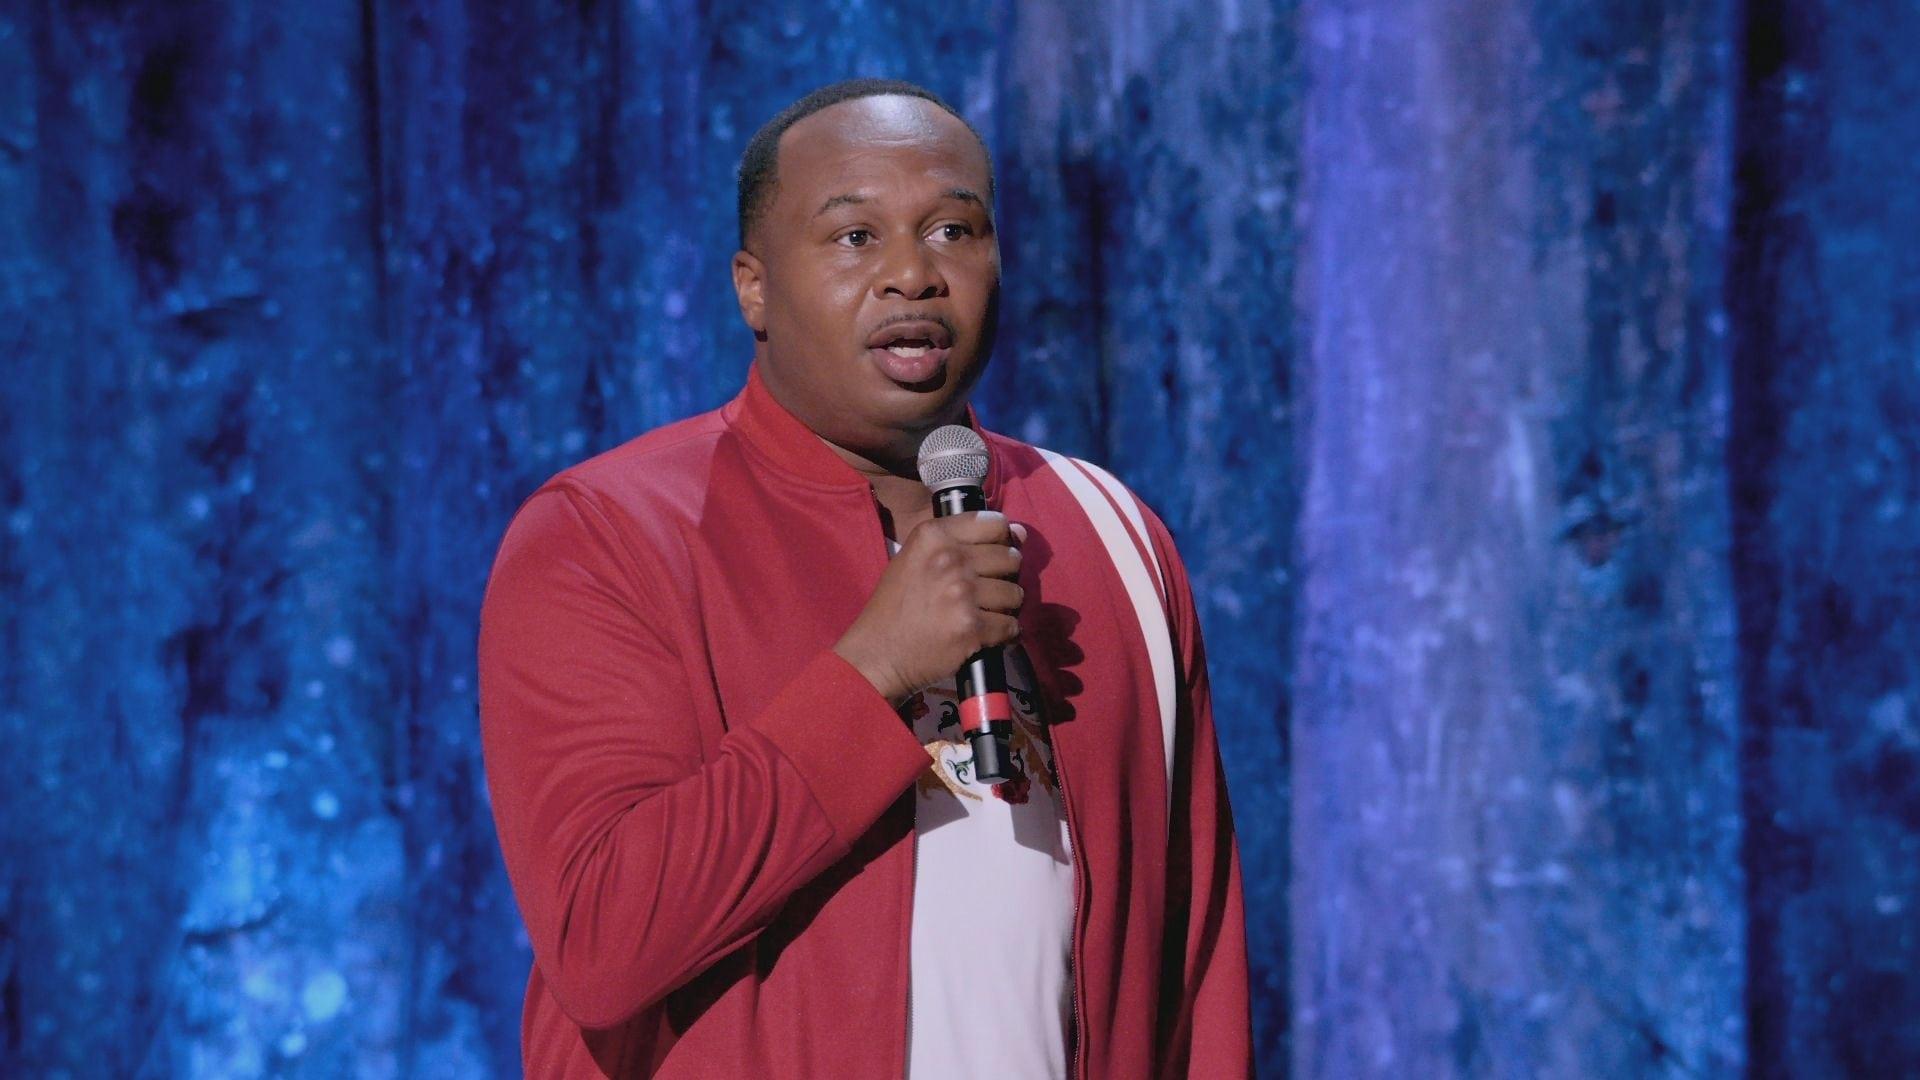 Roy Wood Jr.: No One Loves You backdrop